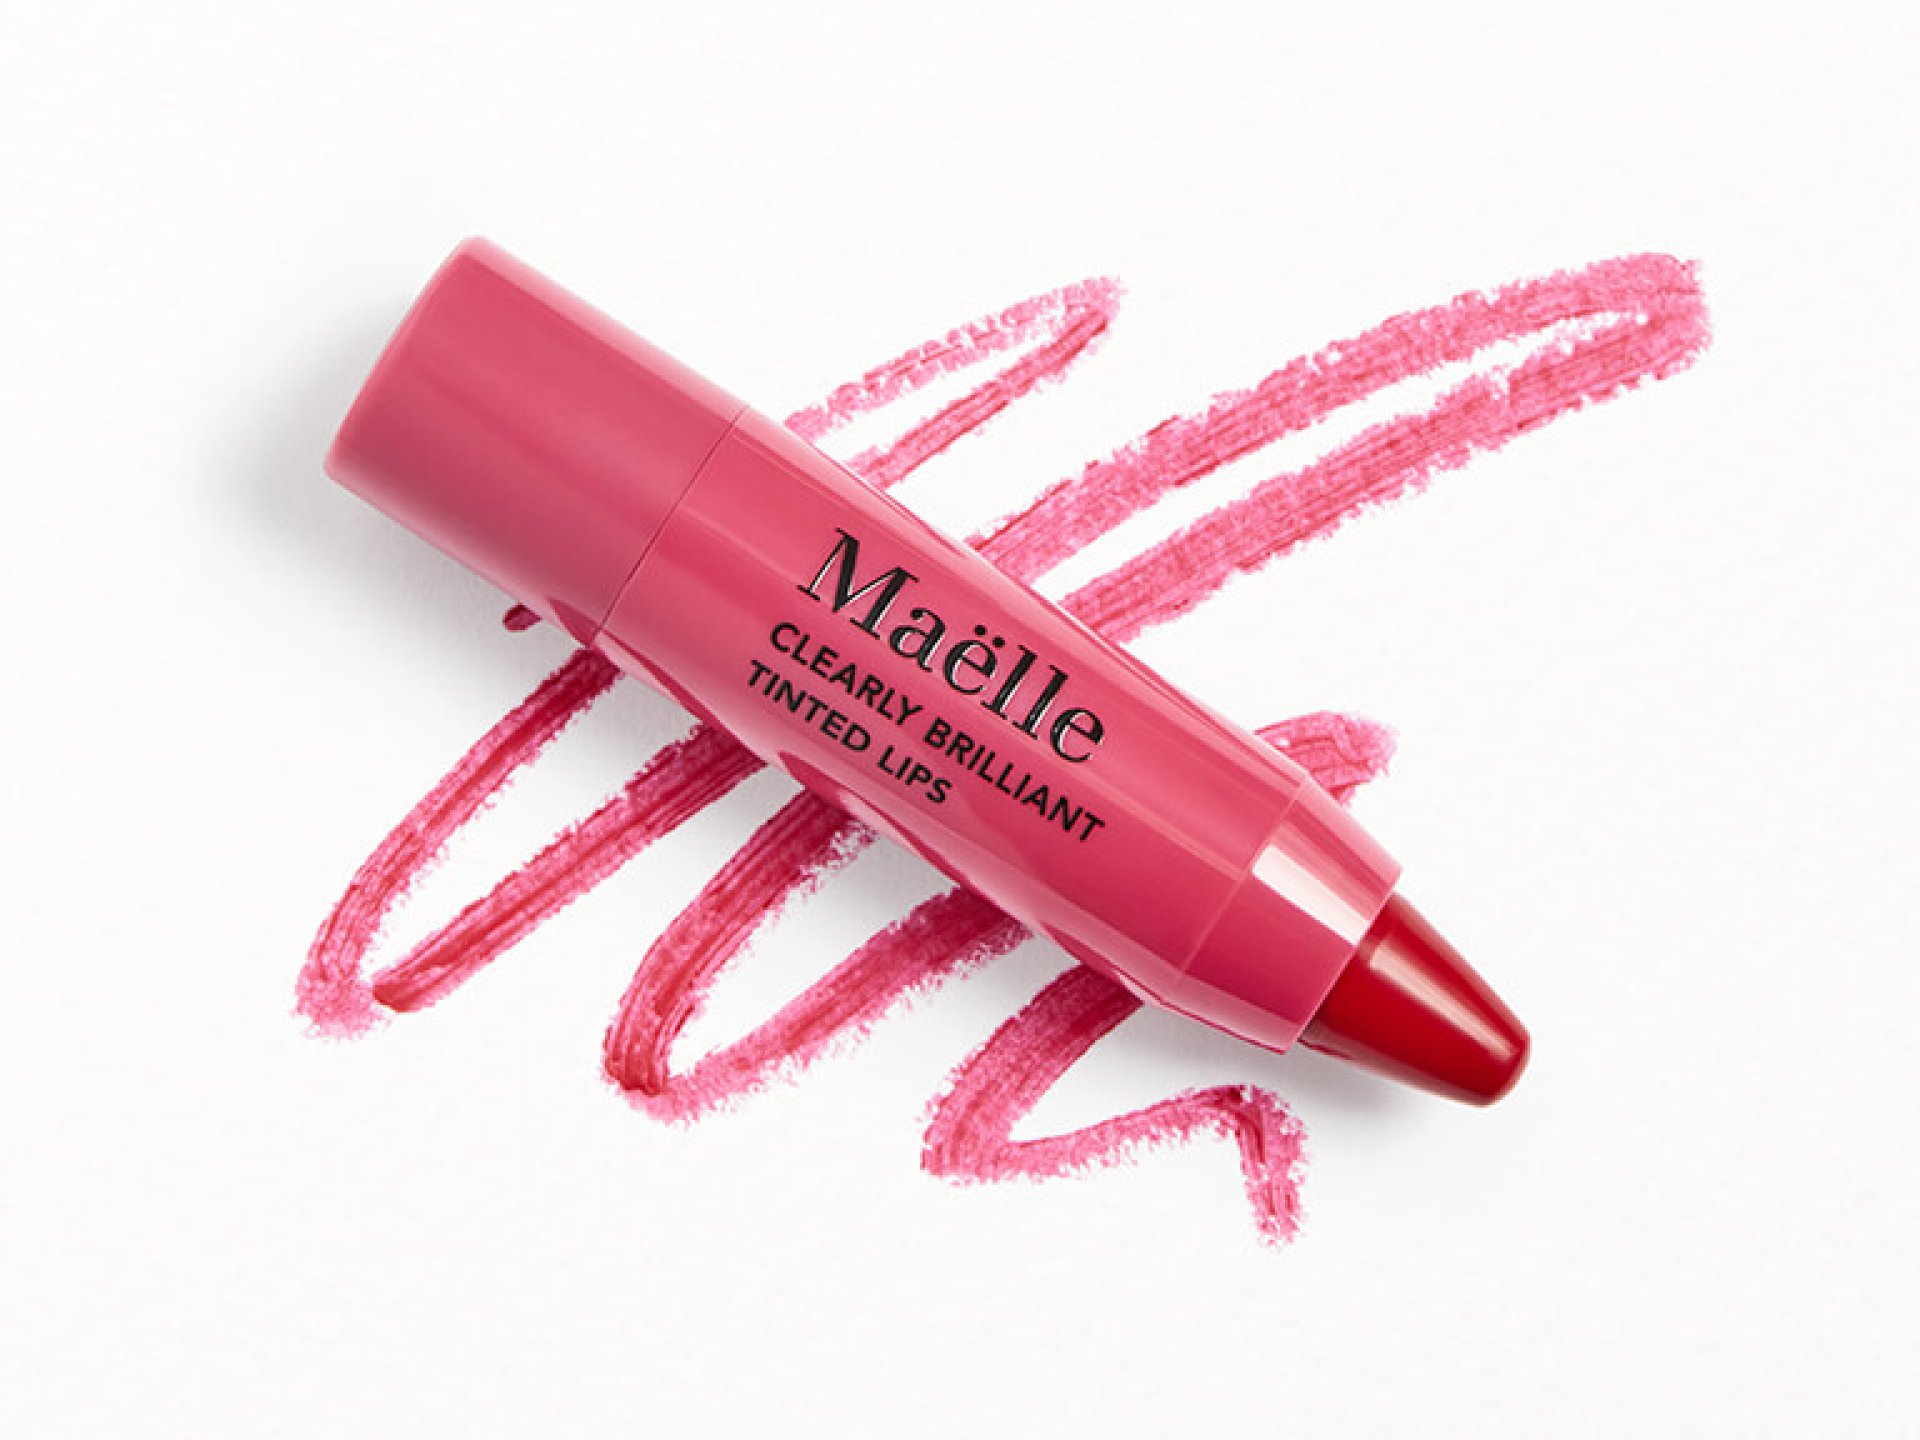 MAËLLE BEAUTY Clearly Brilliant Tinted Lips in Fuchsia